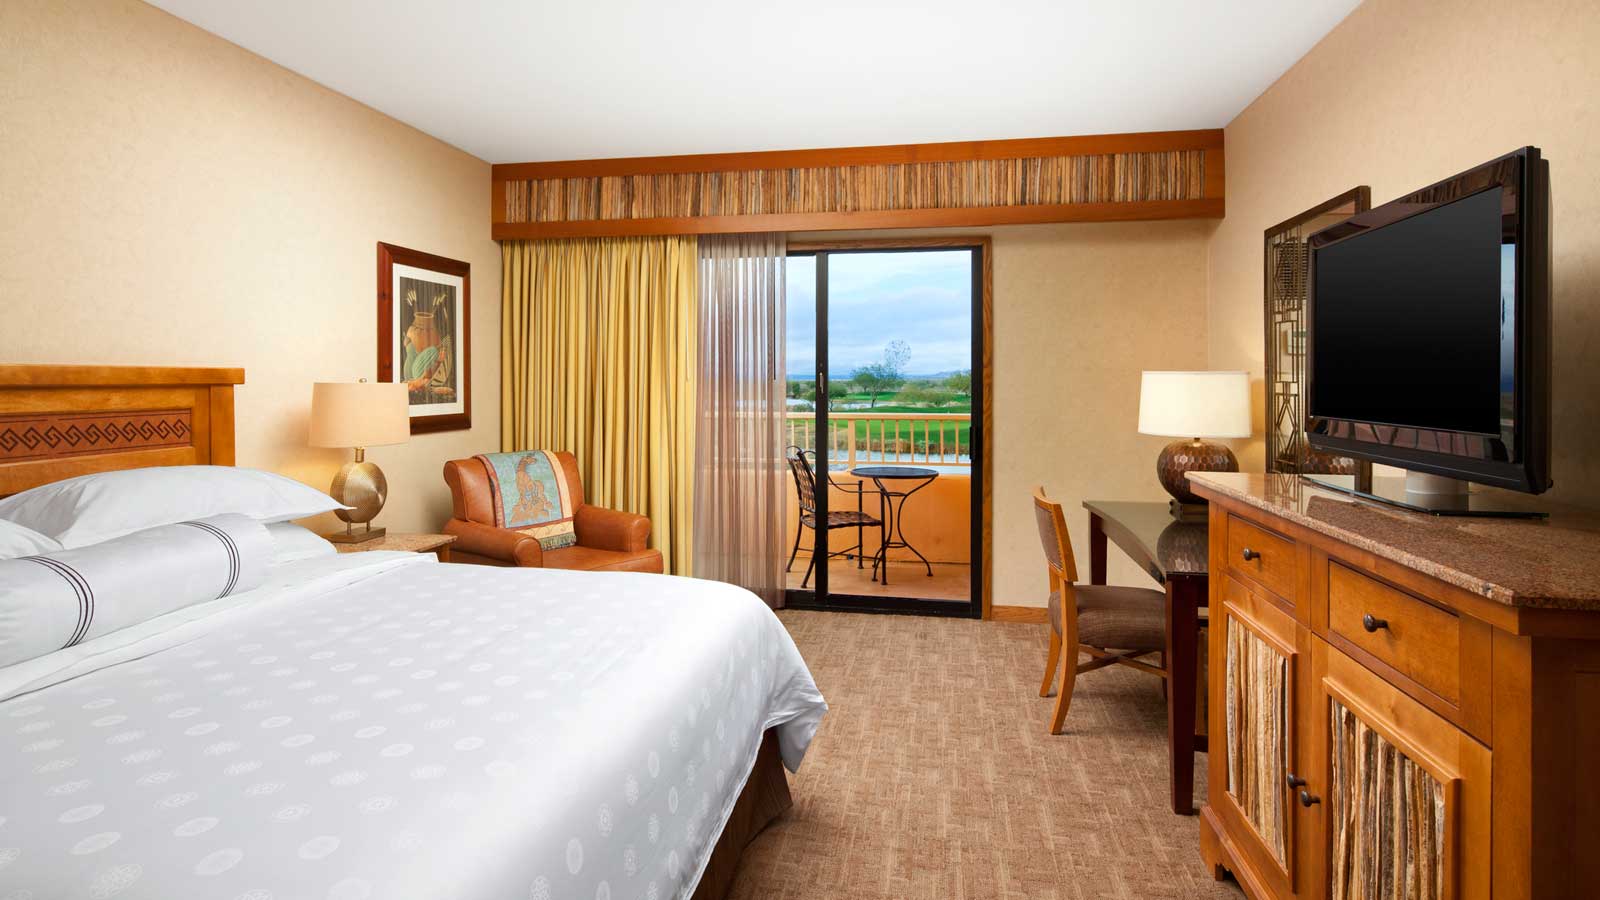 Sheraton Grand at Wild Horse Pass is a great choice for a Phoenix summer staycation